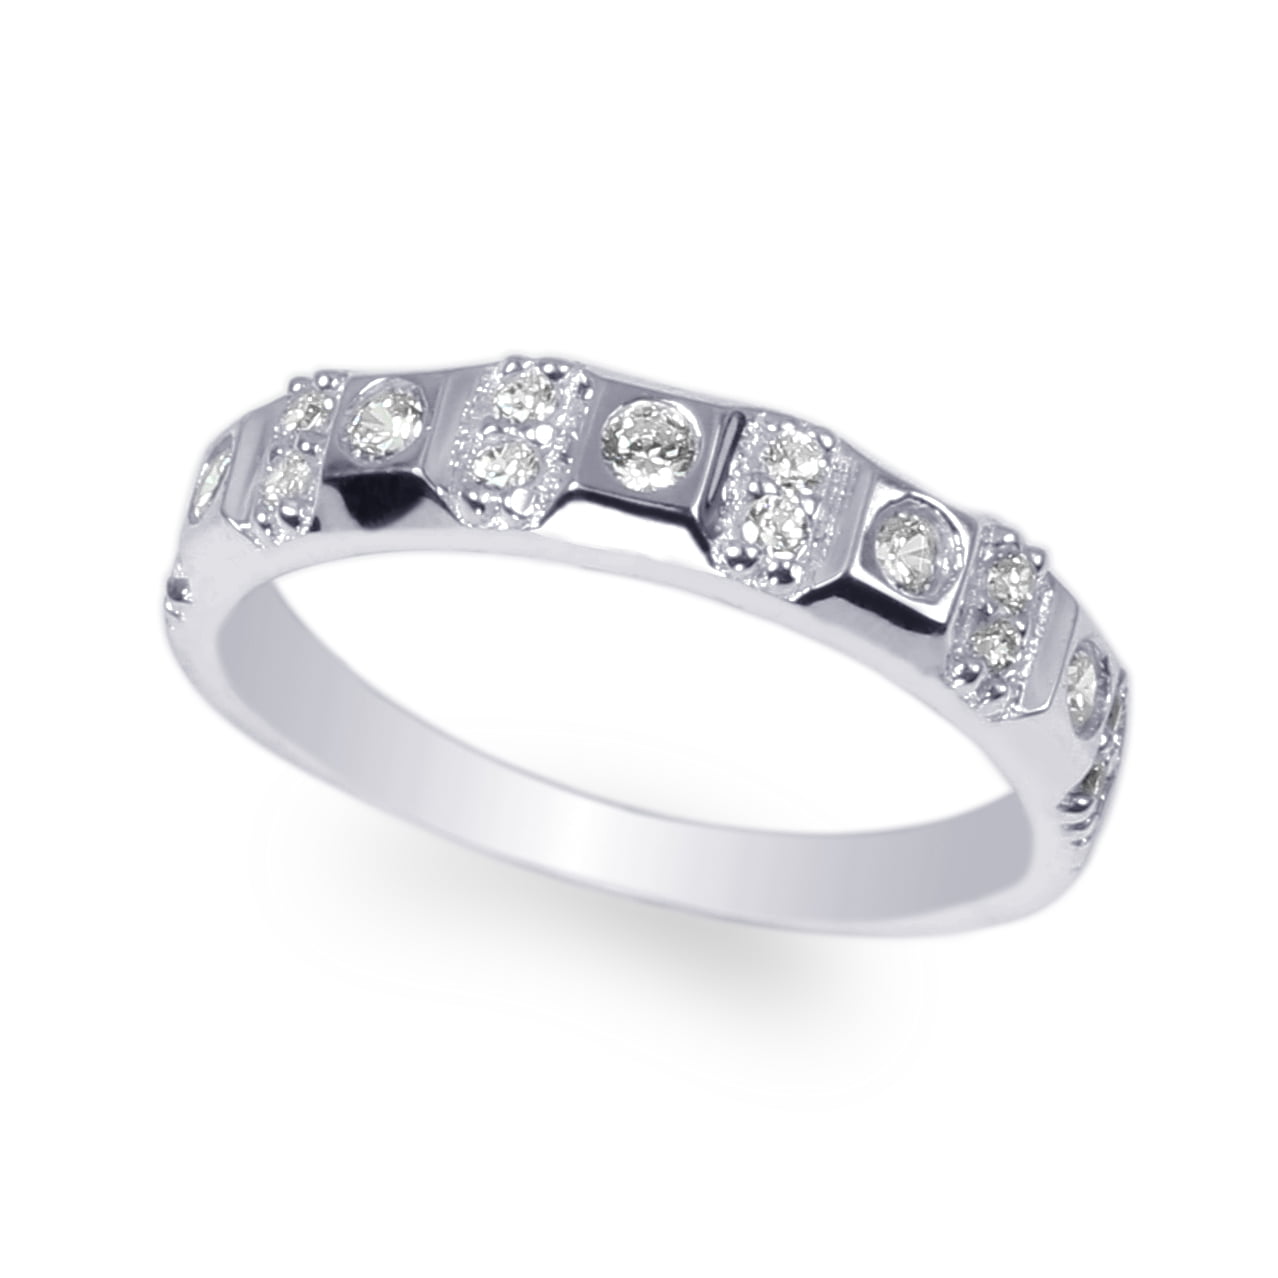 JamesJenny Ladies 14K White Gold Round CZ Channel Band Ring Size 4-10 